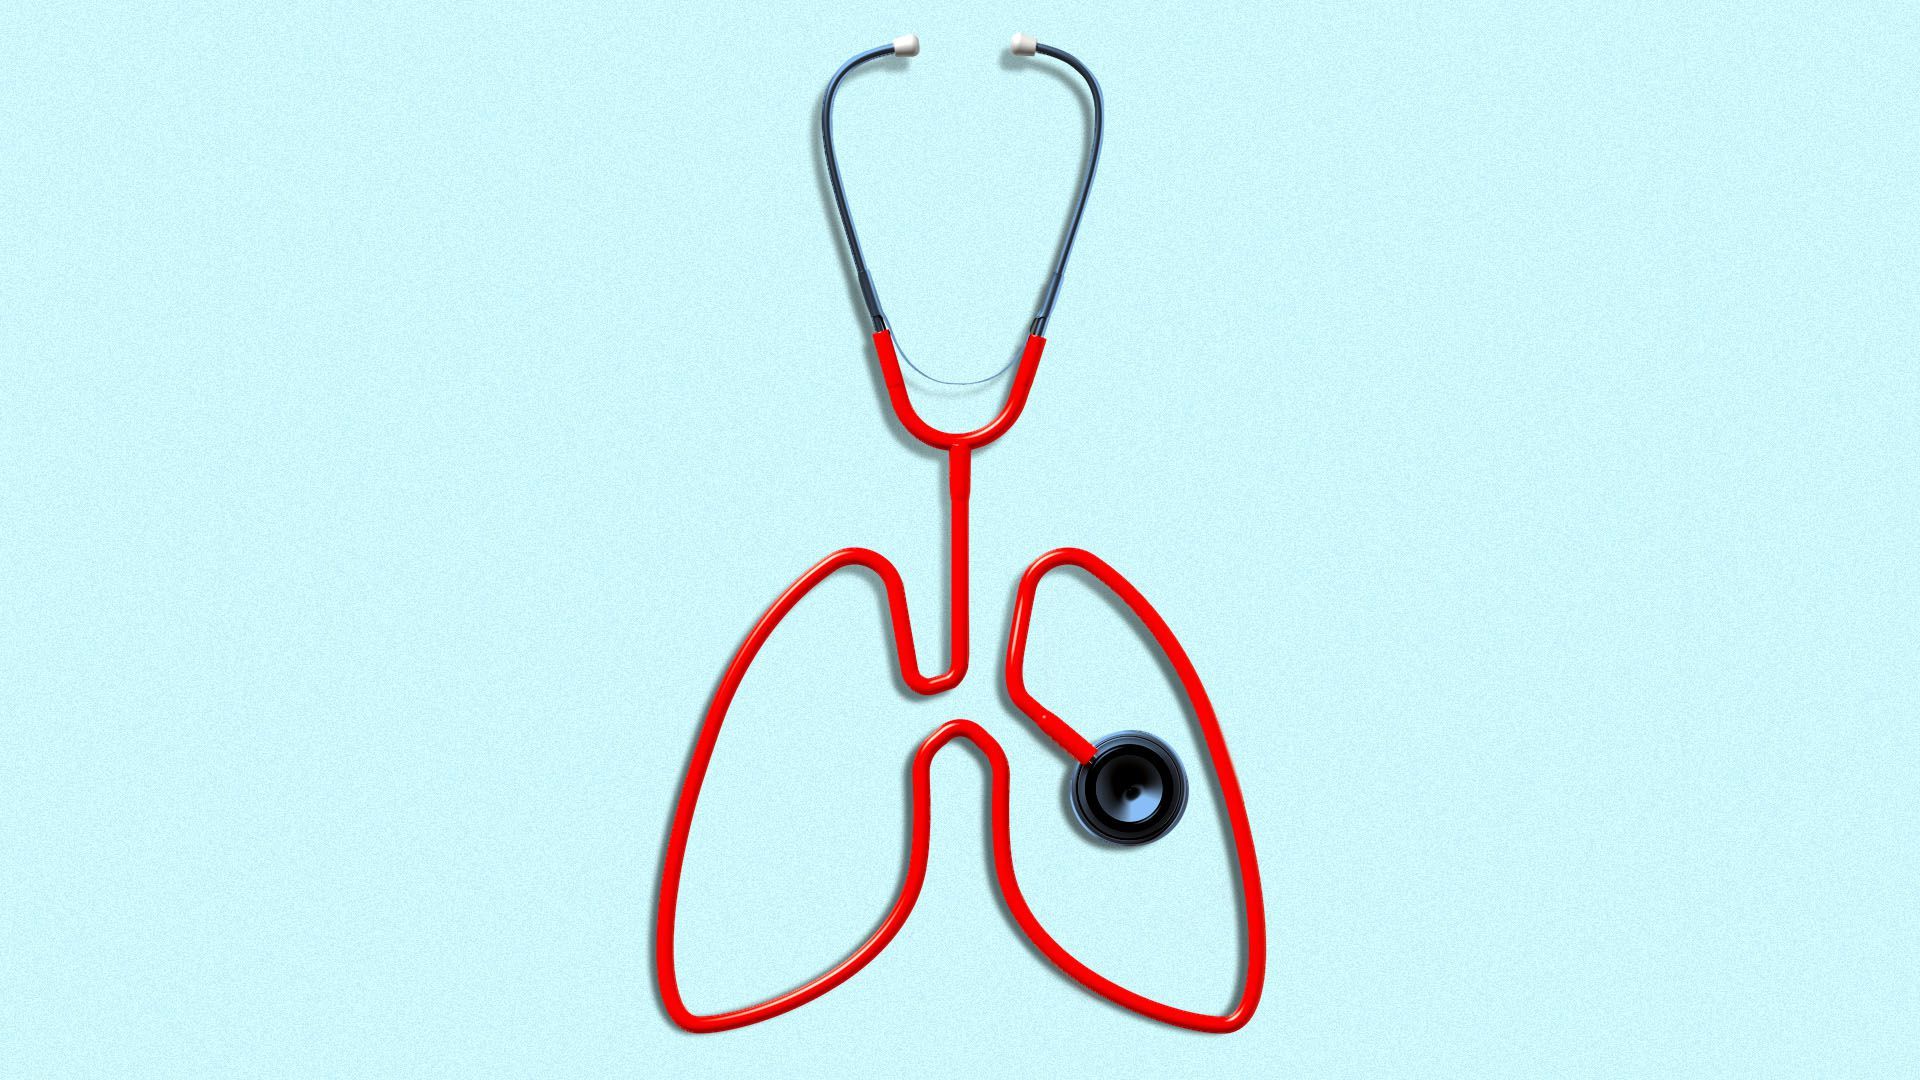 Illustration of a stethoscope in the shape of a pair of lungs